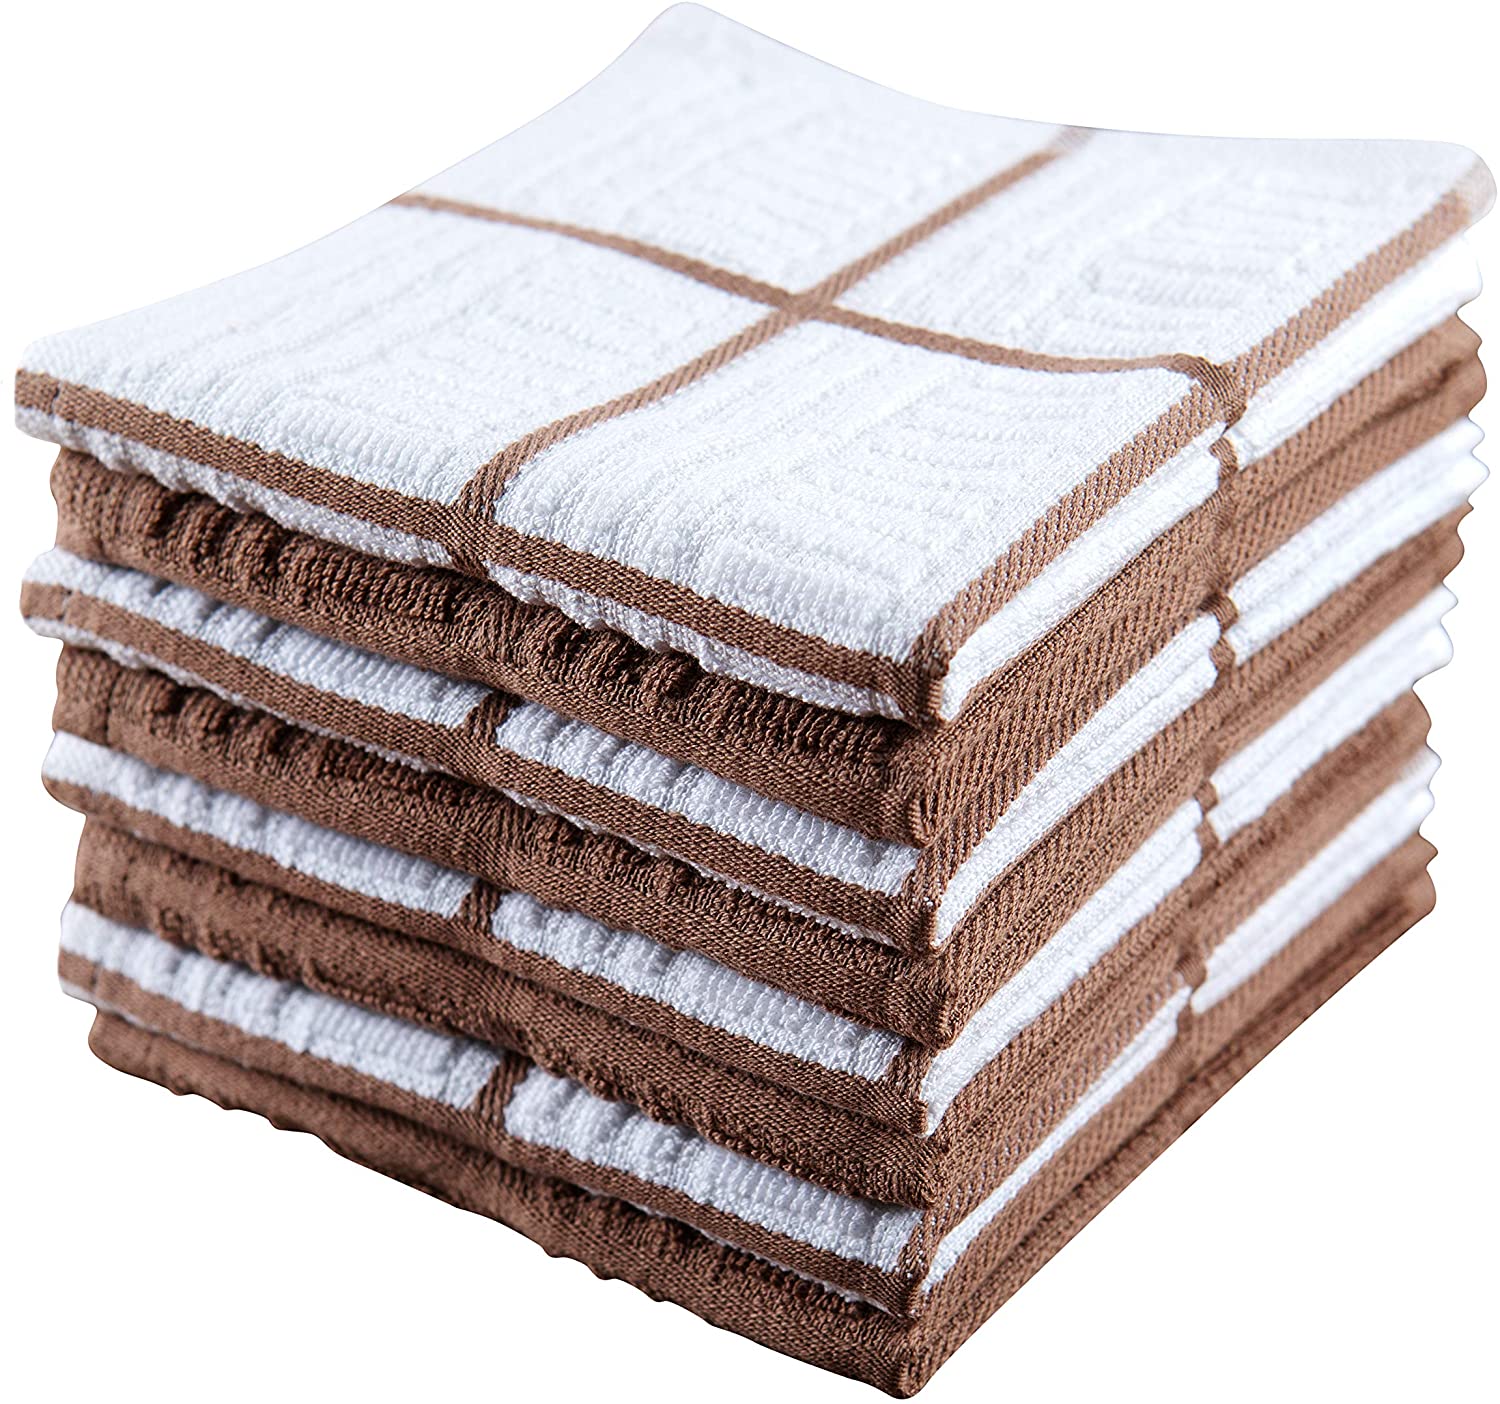 Sticky Toffee Kitchen Towels Dish Towels 100% Cotton, Set of 4, Red and White Hand Towels, Tea Towels, Reusable Absorbent Cleaning Cloths, 28 in x 16